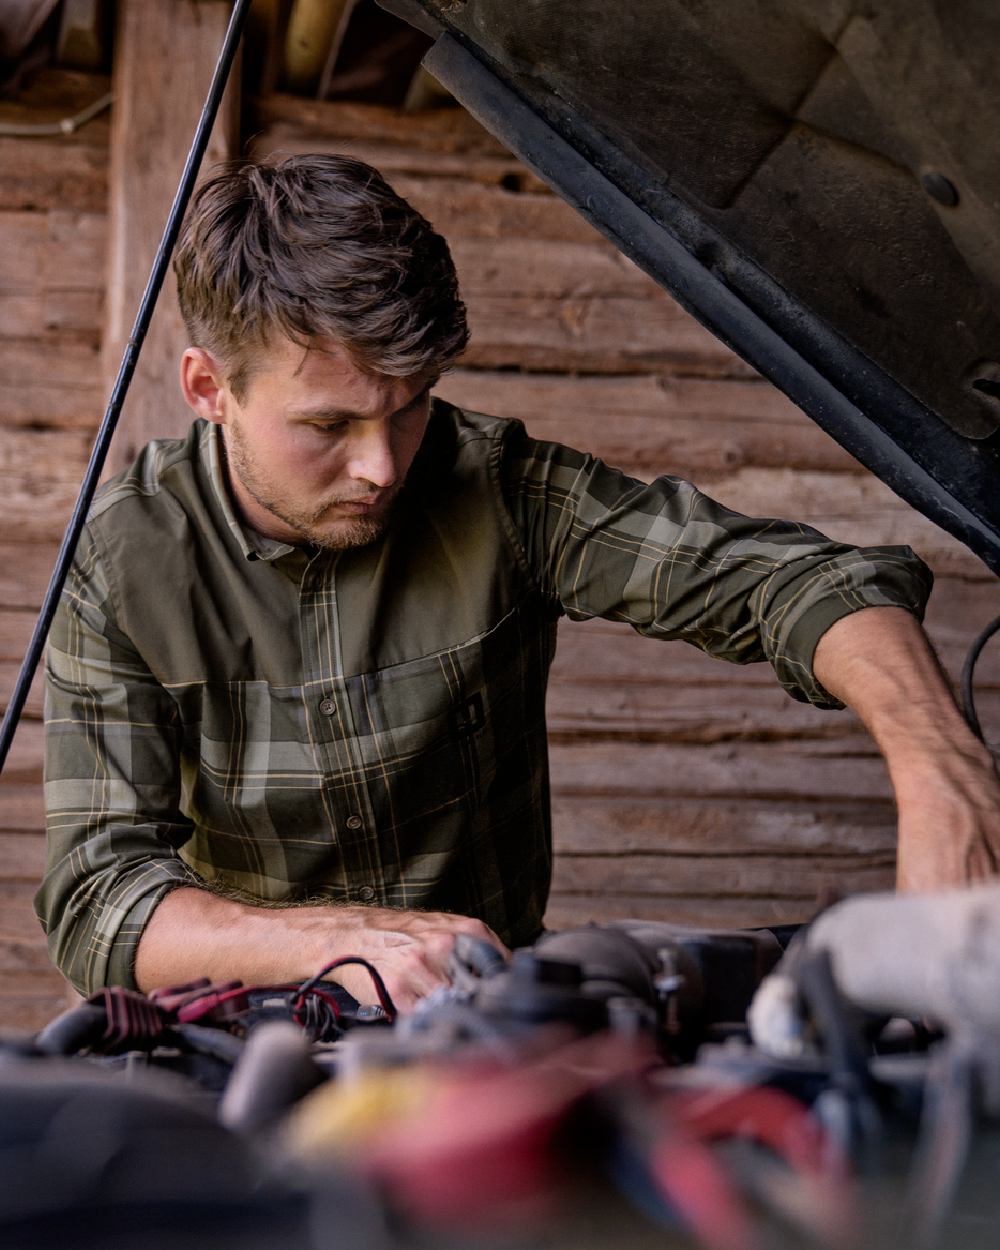 Willow Green coloured Harkila Anker Long Sleeve Shirt worn by man working on an engine in a farm